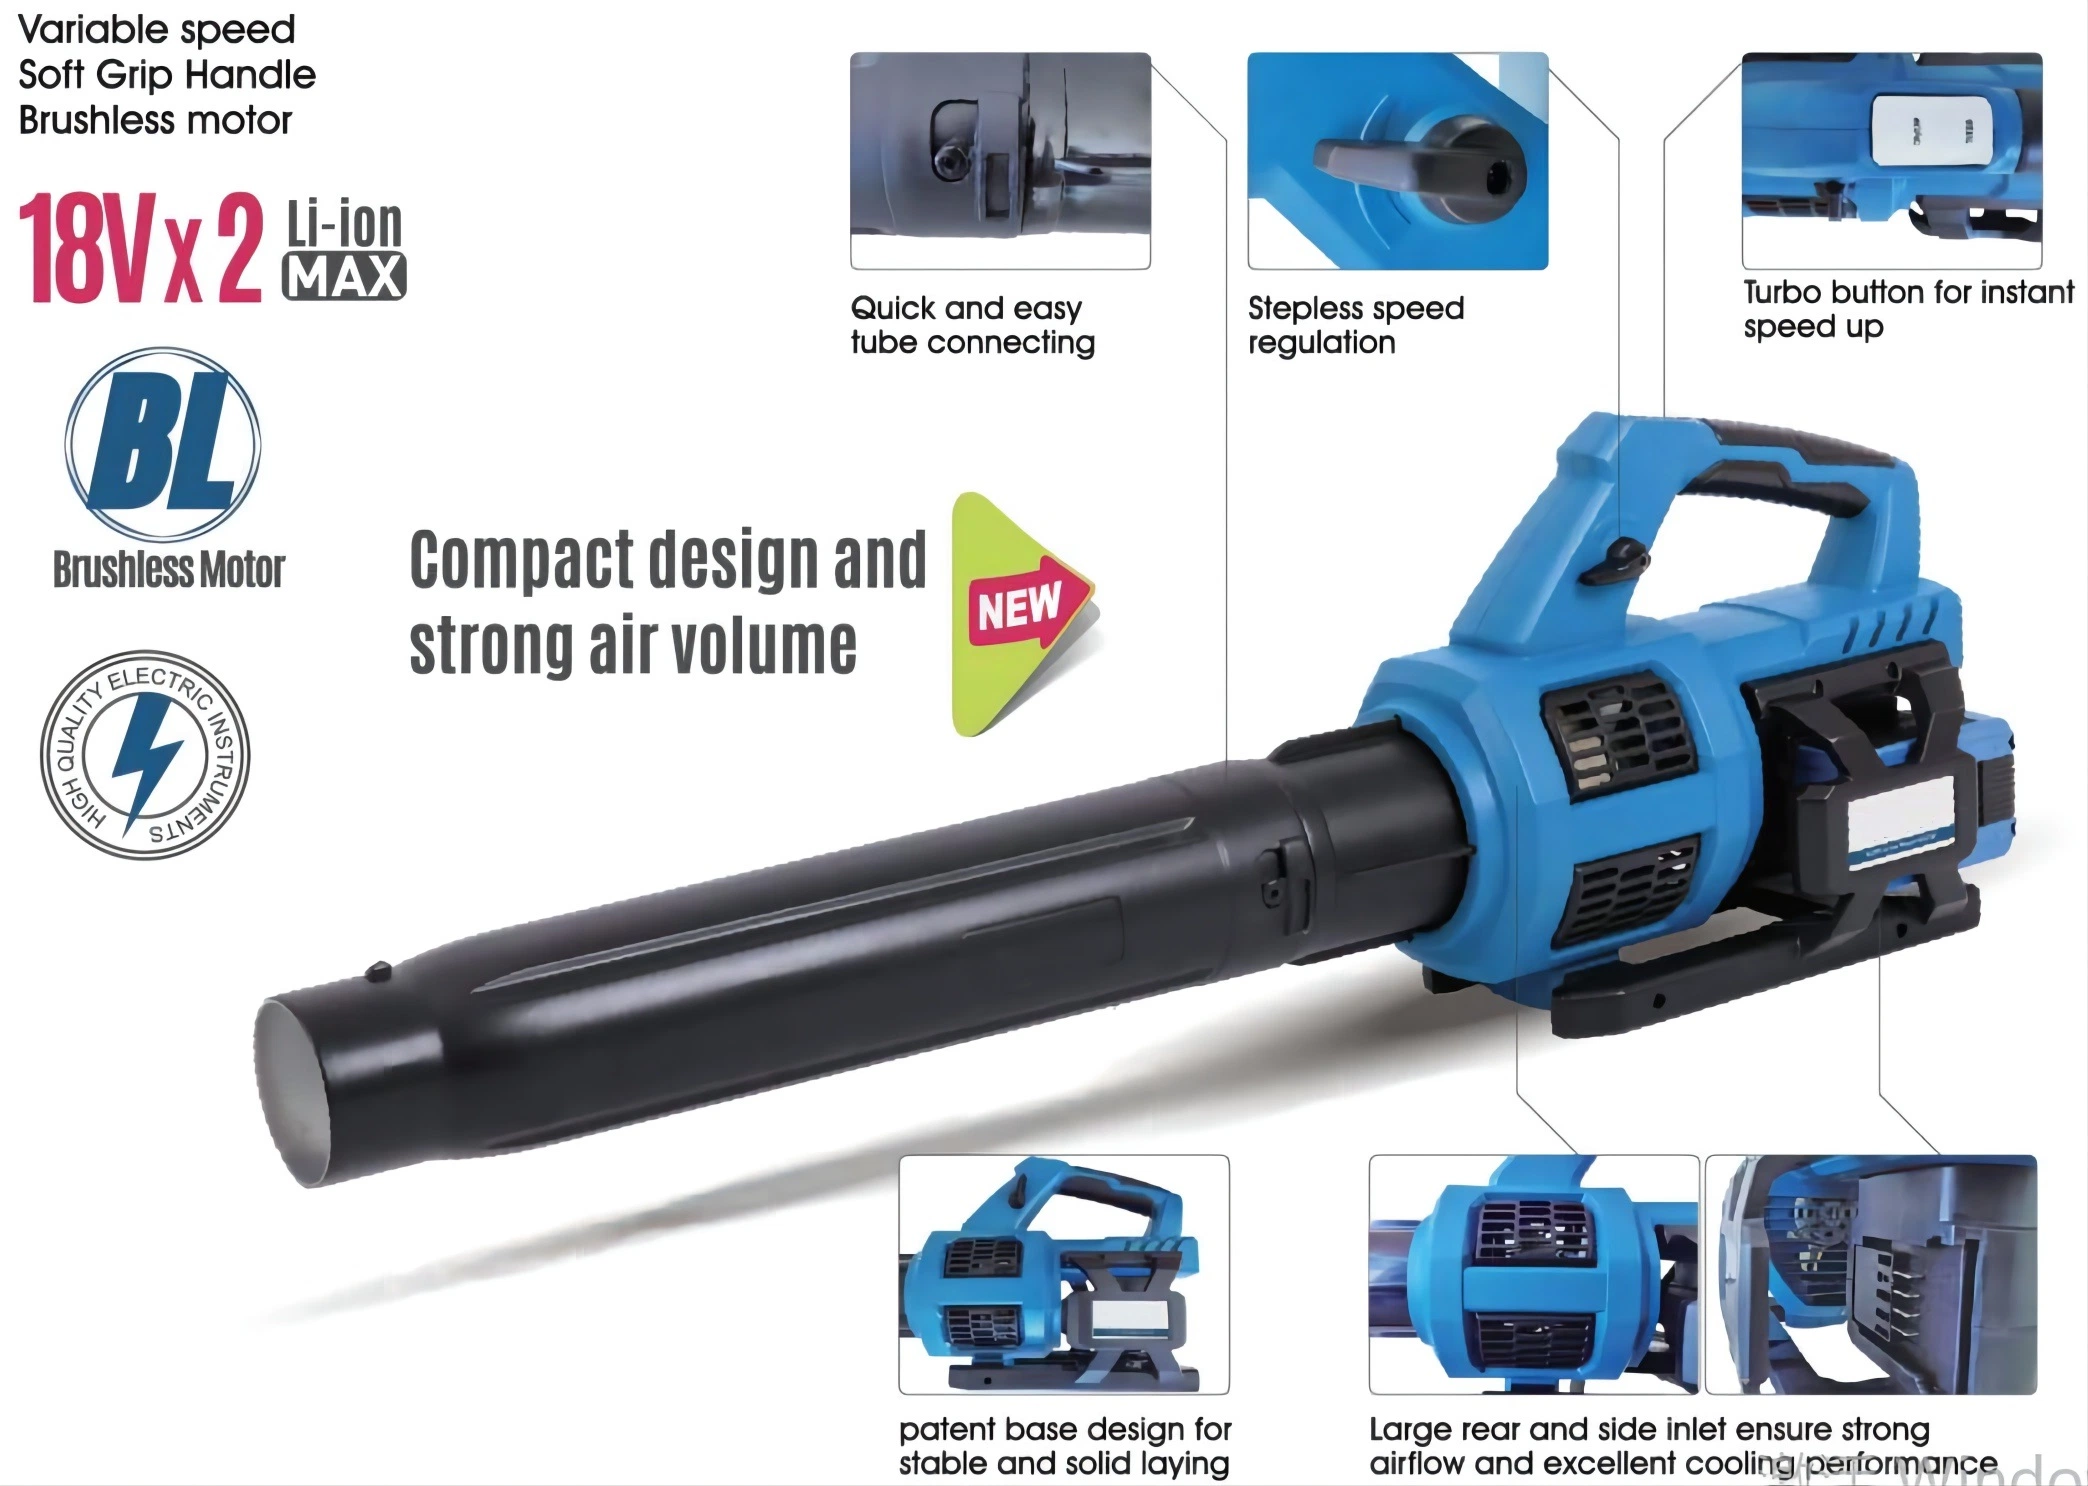 New-DC20V Max-Li-ion Battery-Cordless/Electric-Garden Power-Tool Machines-Axial Flow/Debris Blower